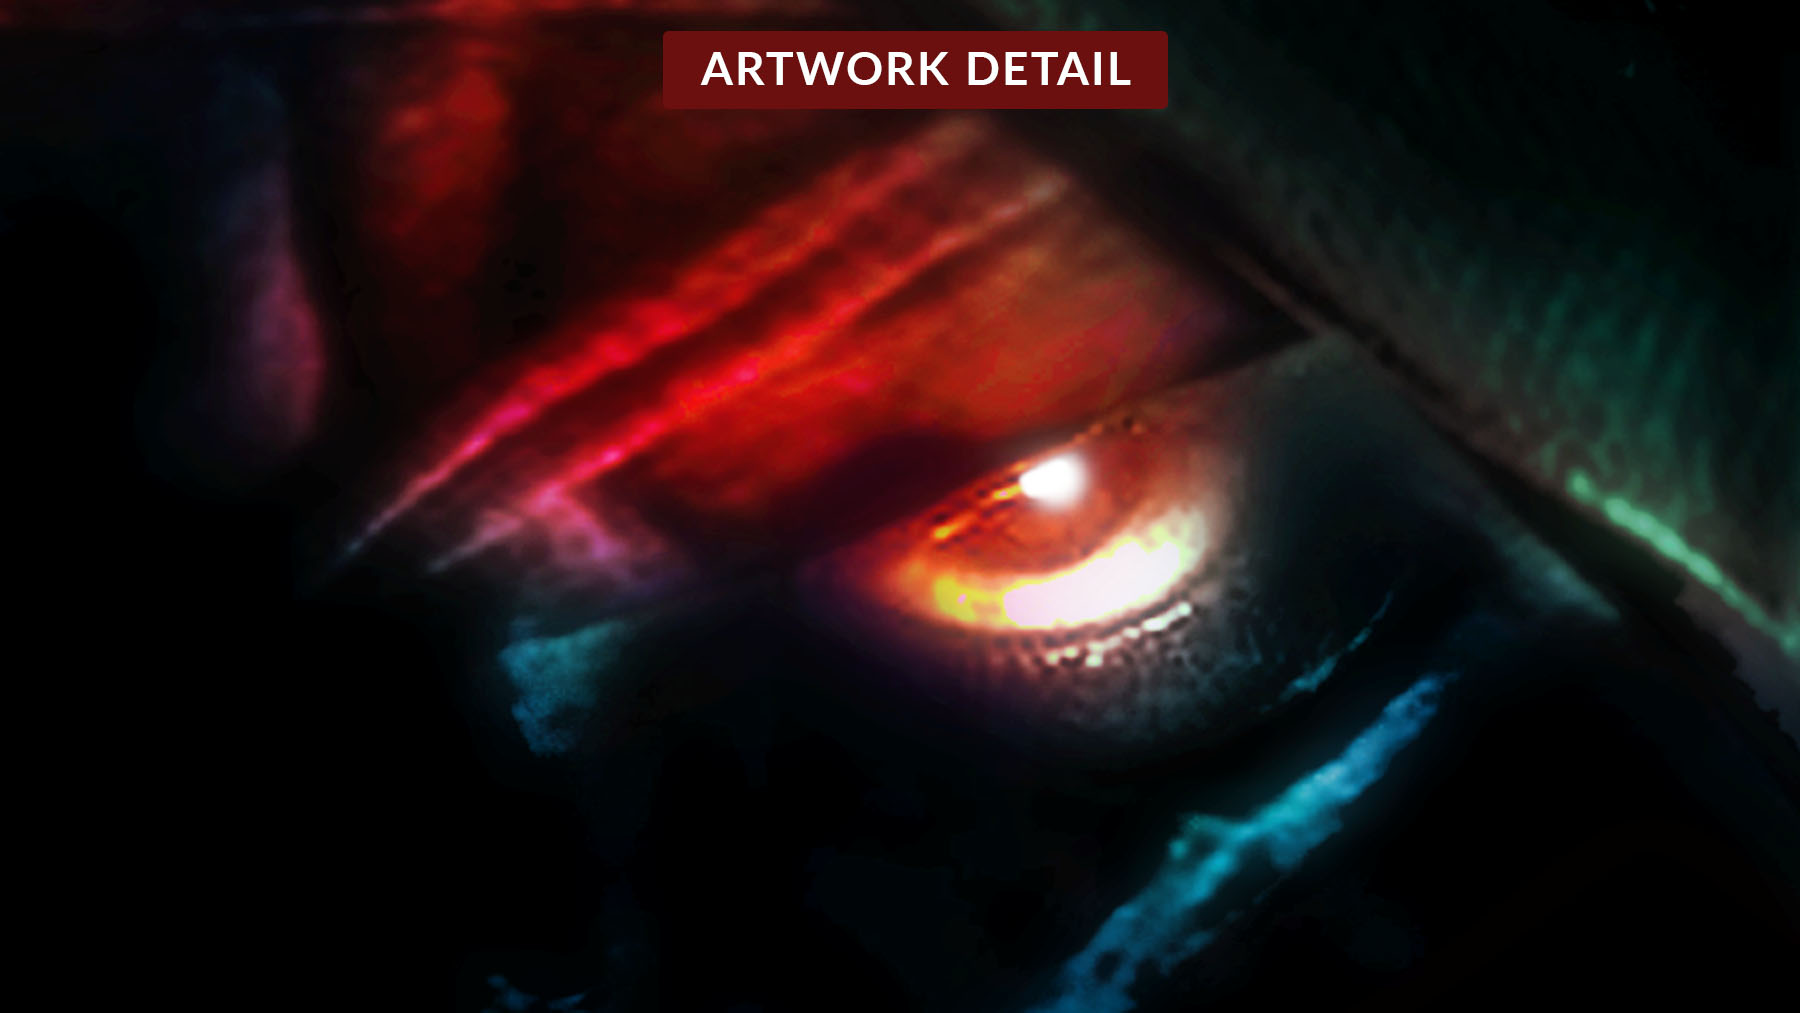 Eye detail from the Then Death has Come NFT collectible artwork